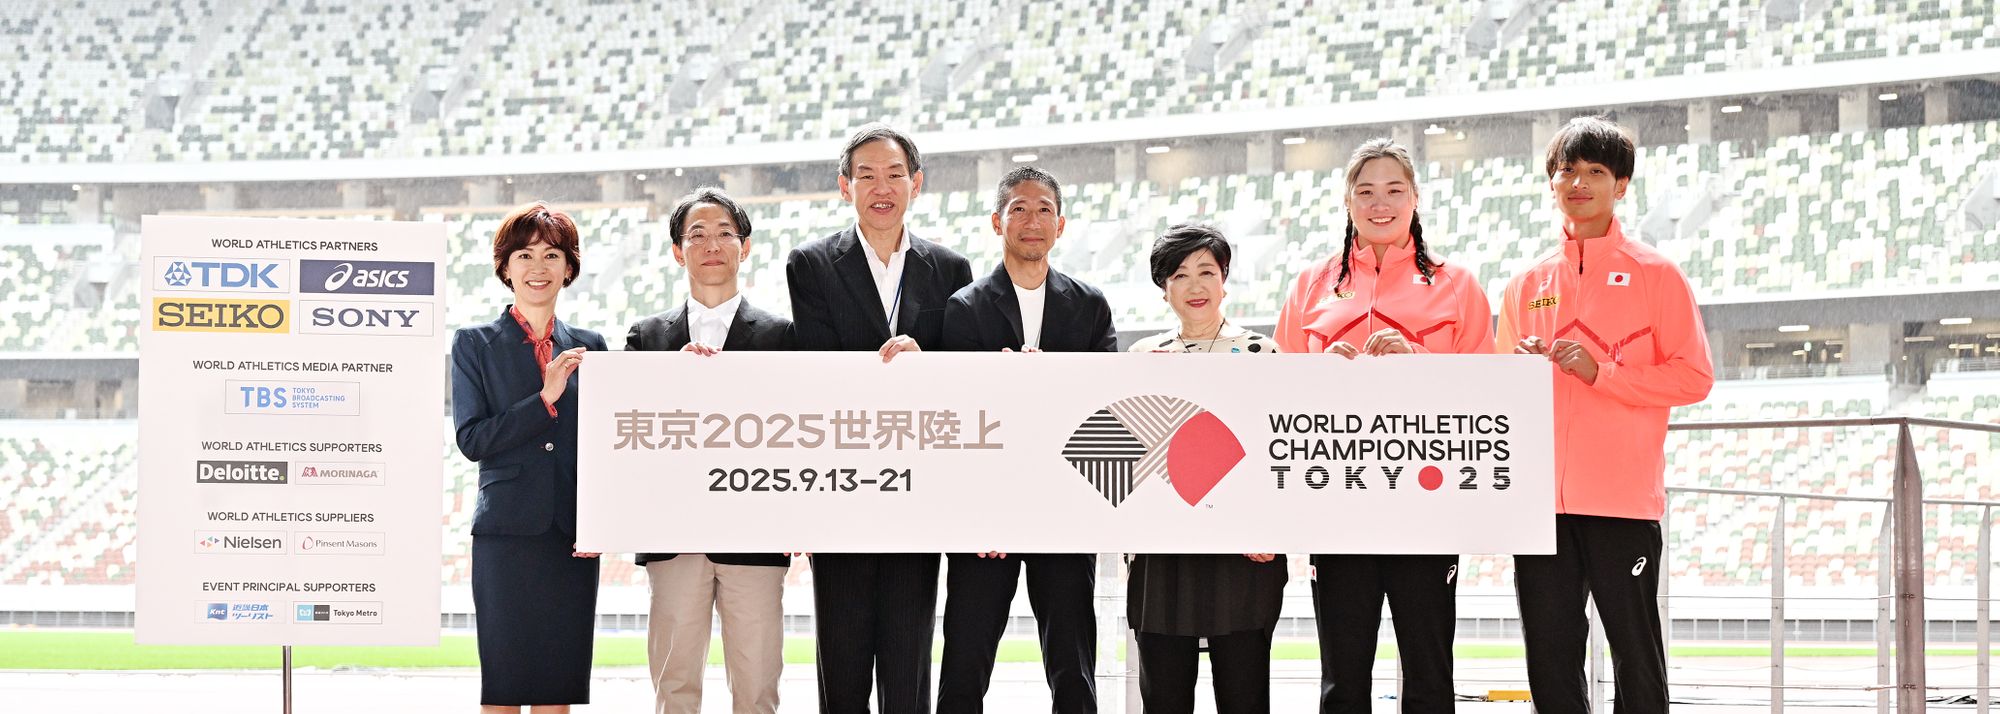 On 13 May, 2024, the Local Organising Committee of Word Athletics Championships Tokyo 25 (WCH Tokyo 25 LOC) held a press event for the public unveiling of the official logo of WCH Tokyo 25, which is scheduled to take place from 13 to 21 September, 2025.